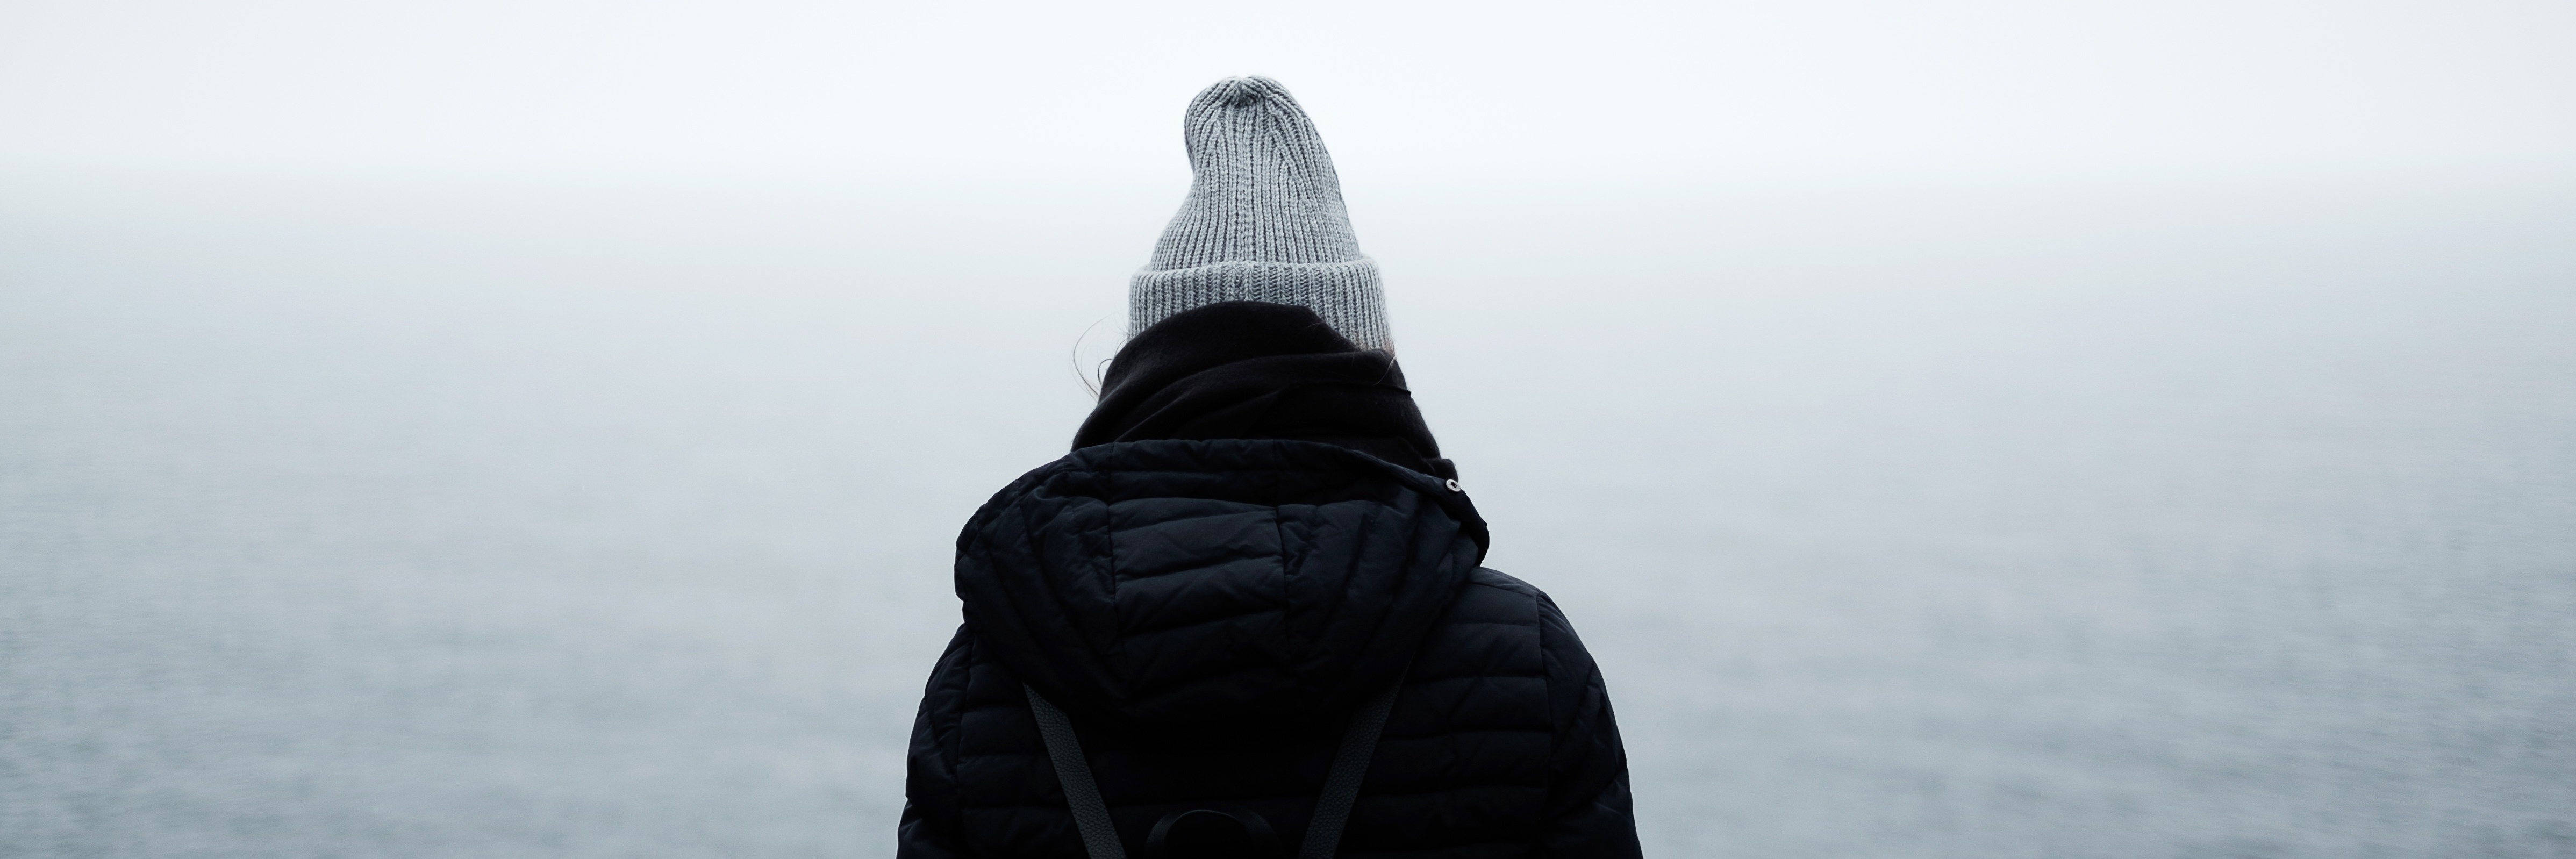 person looking out at misty ocean wearing hat and coat